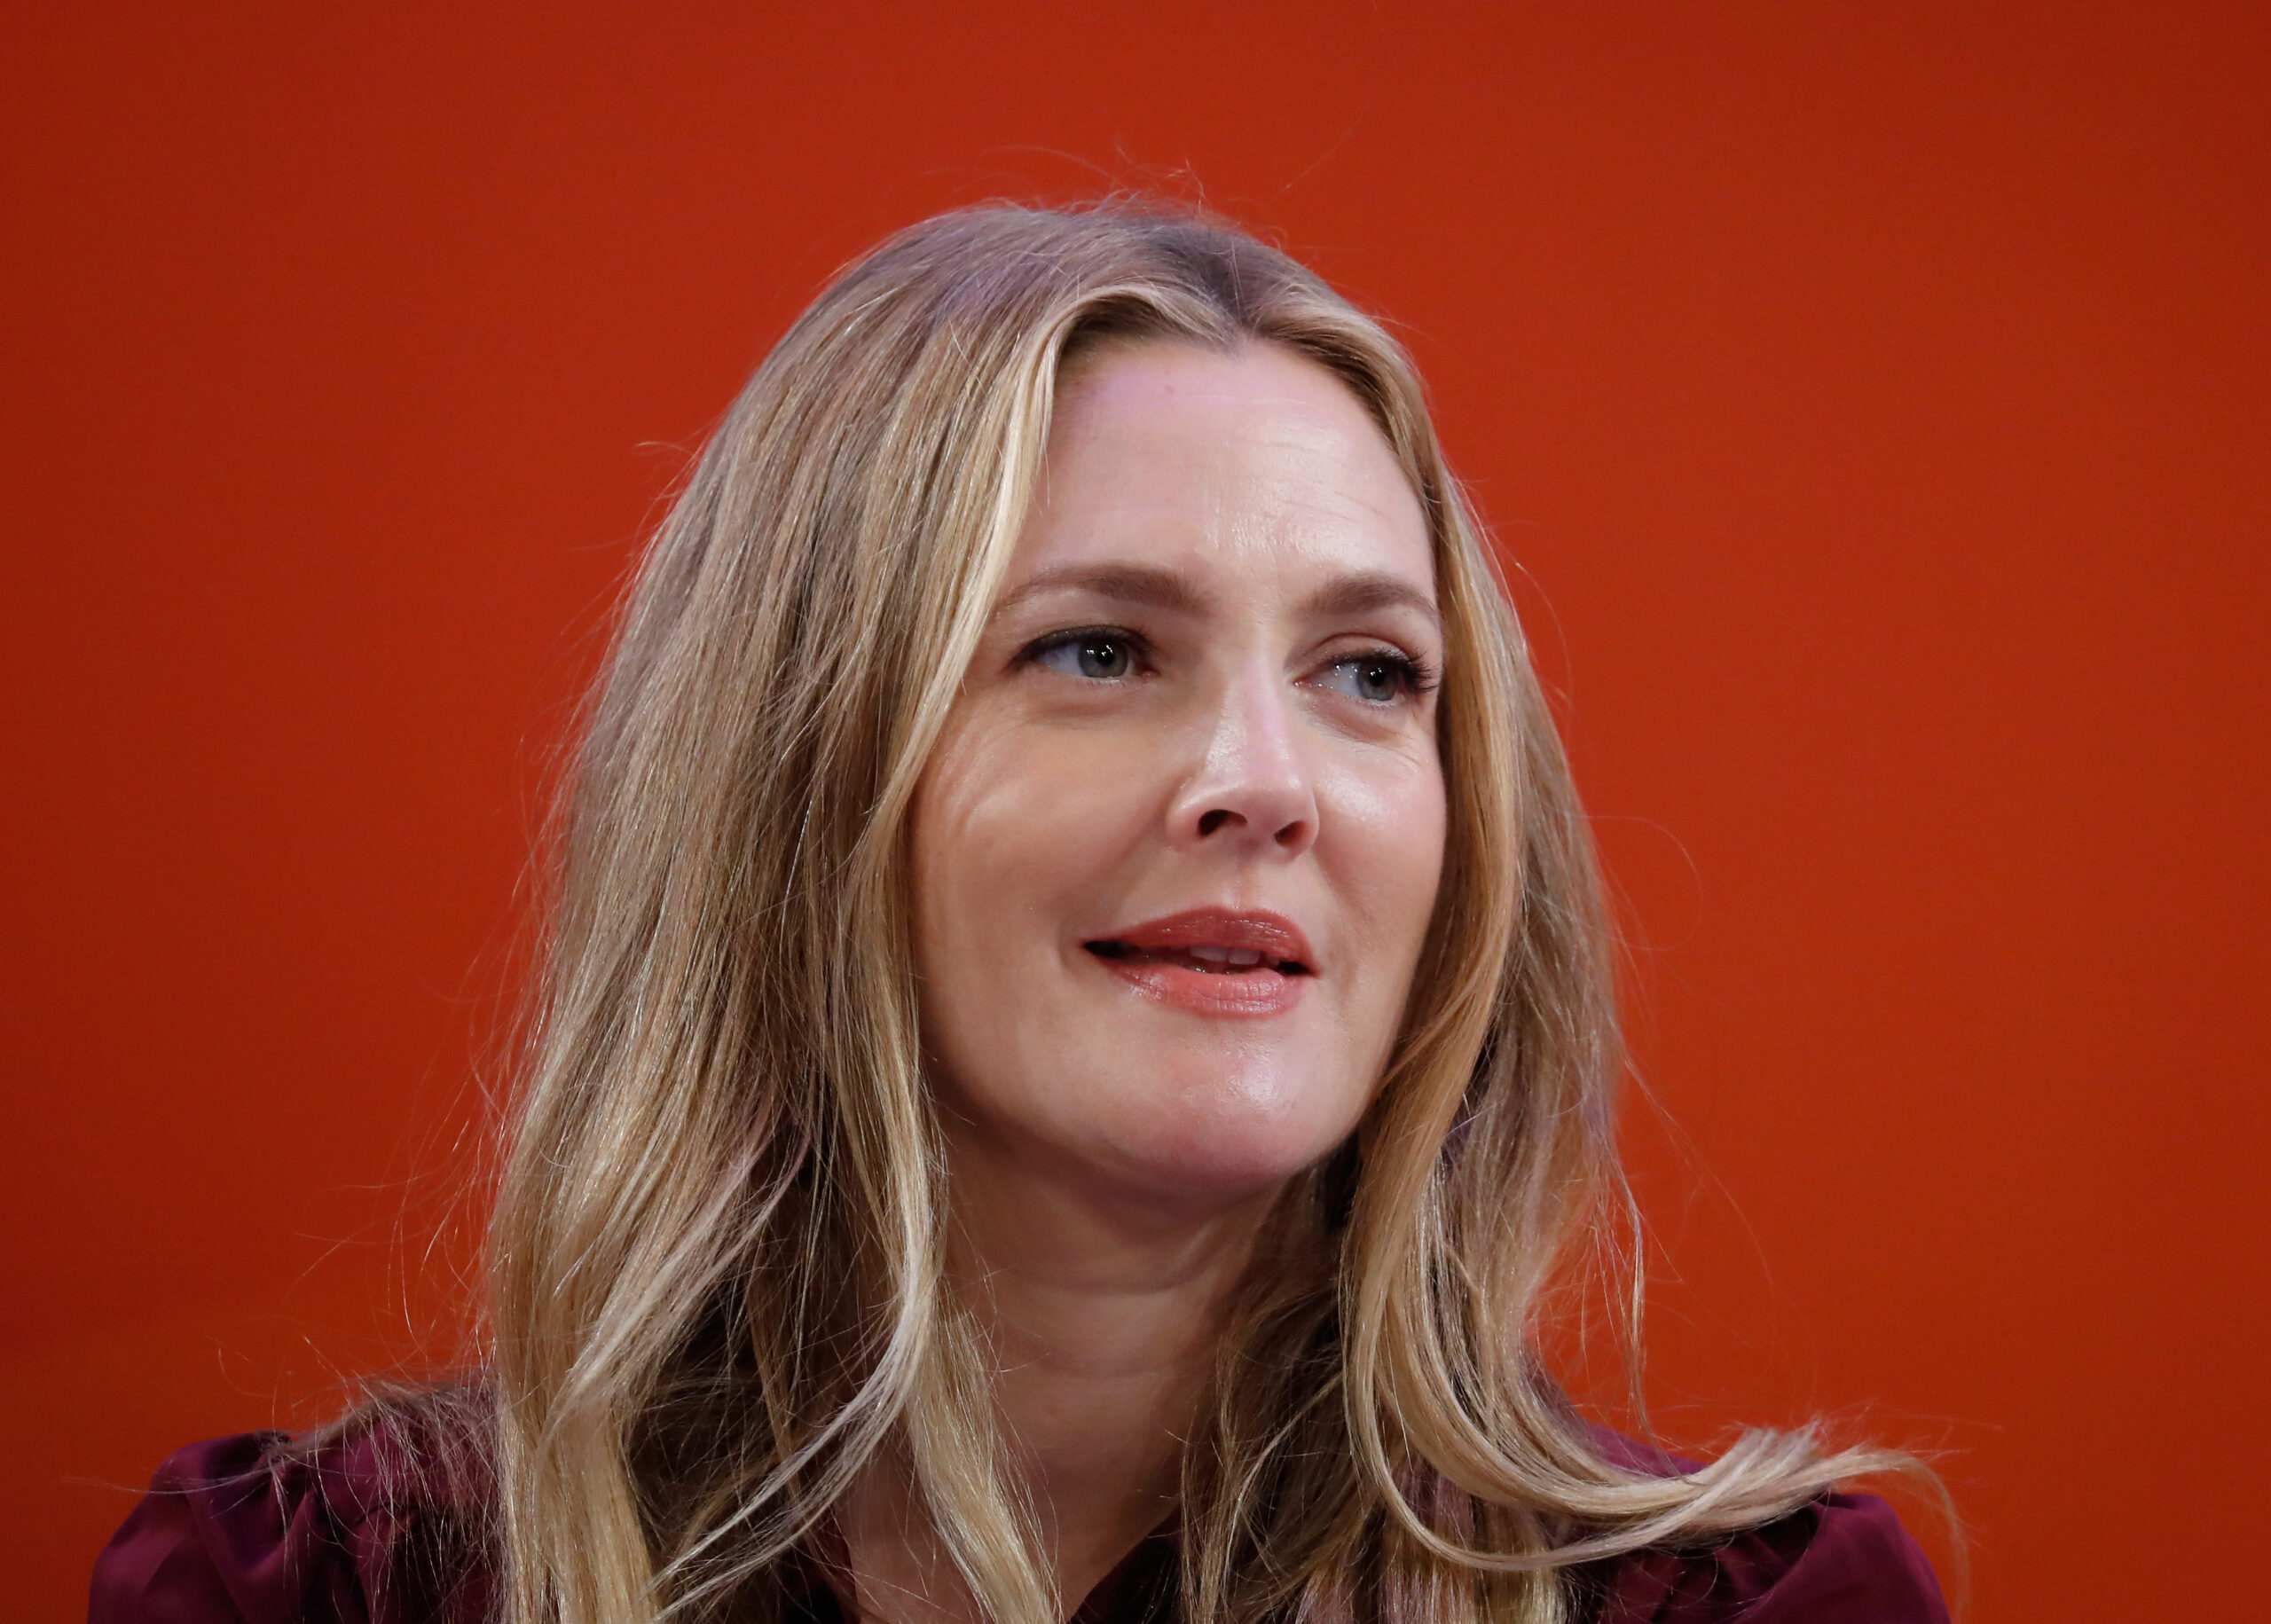 Drew Barrymore criticizes tabloids for saying she wants her mom to die.